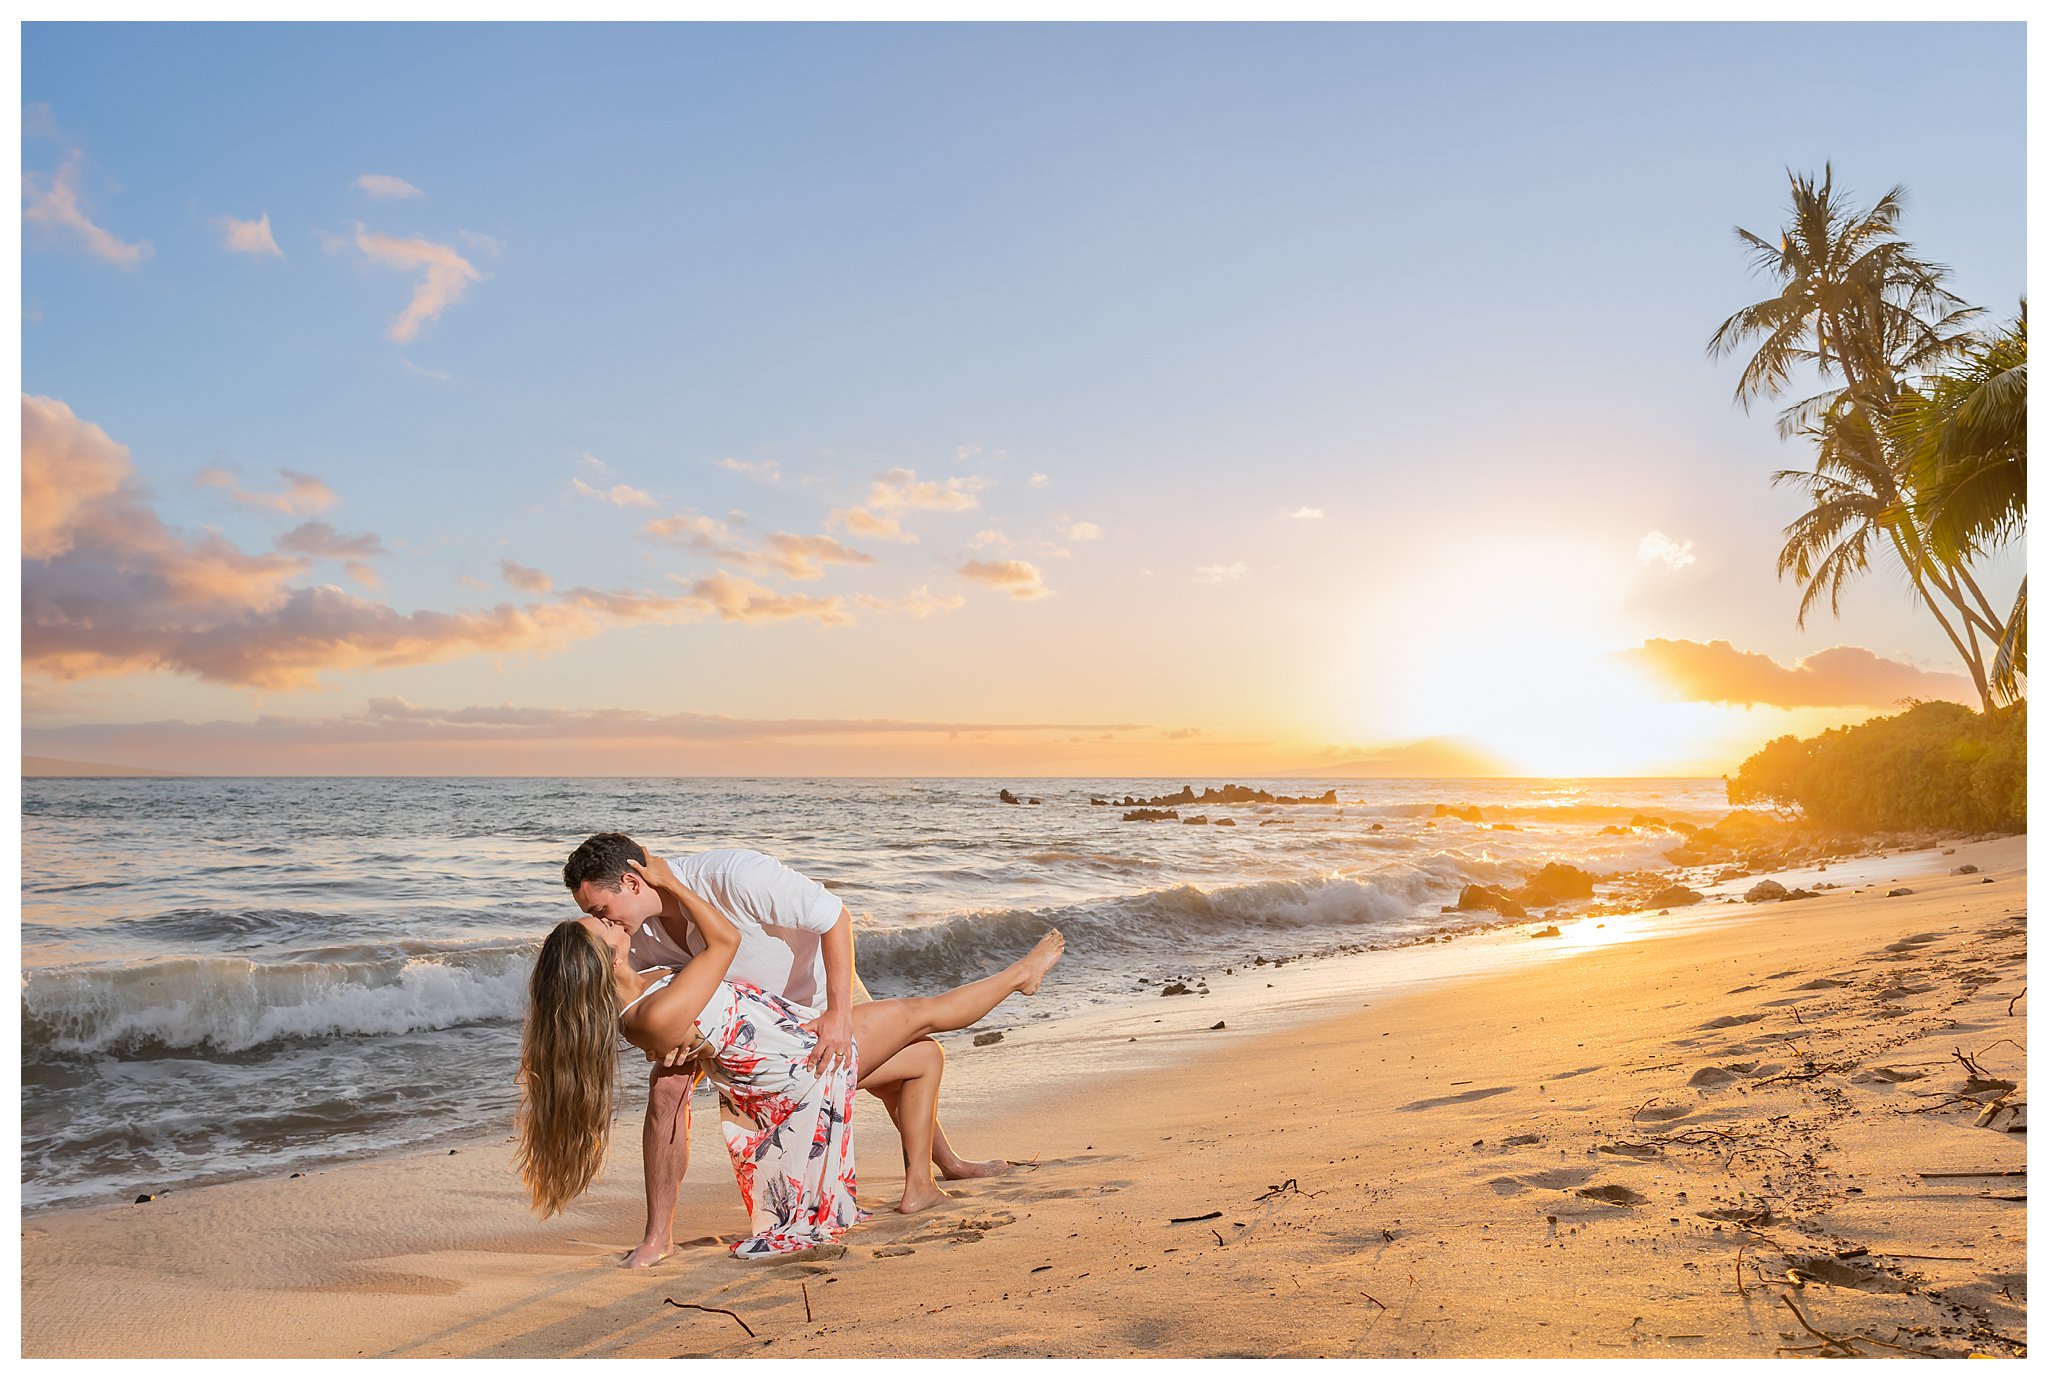 Two people pose on the beach in front of the ocean during sunset